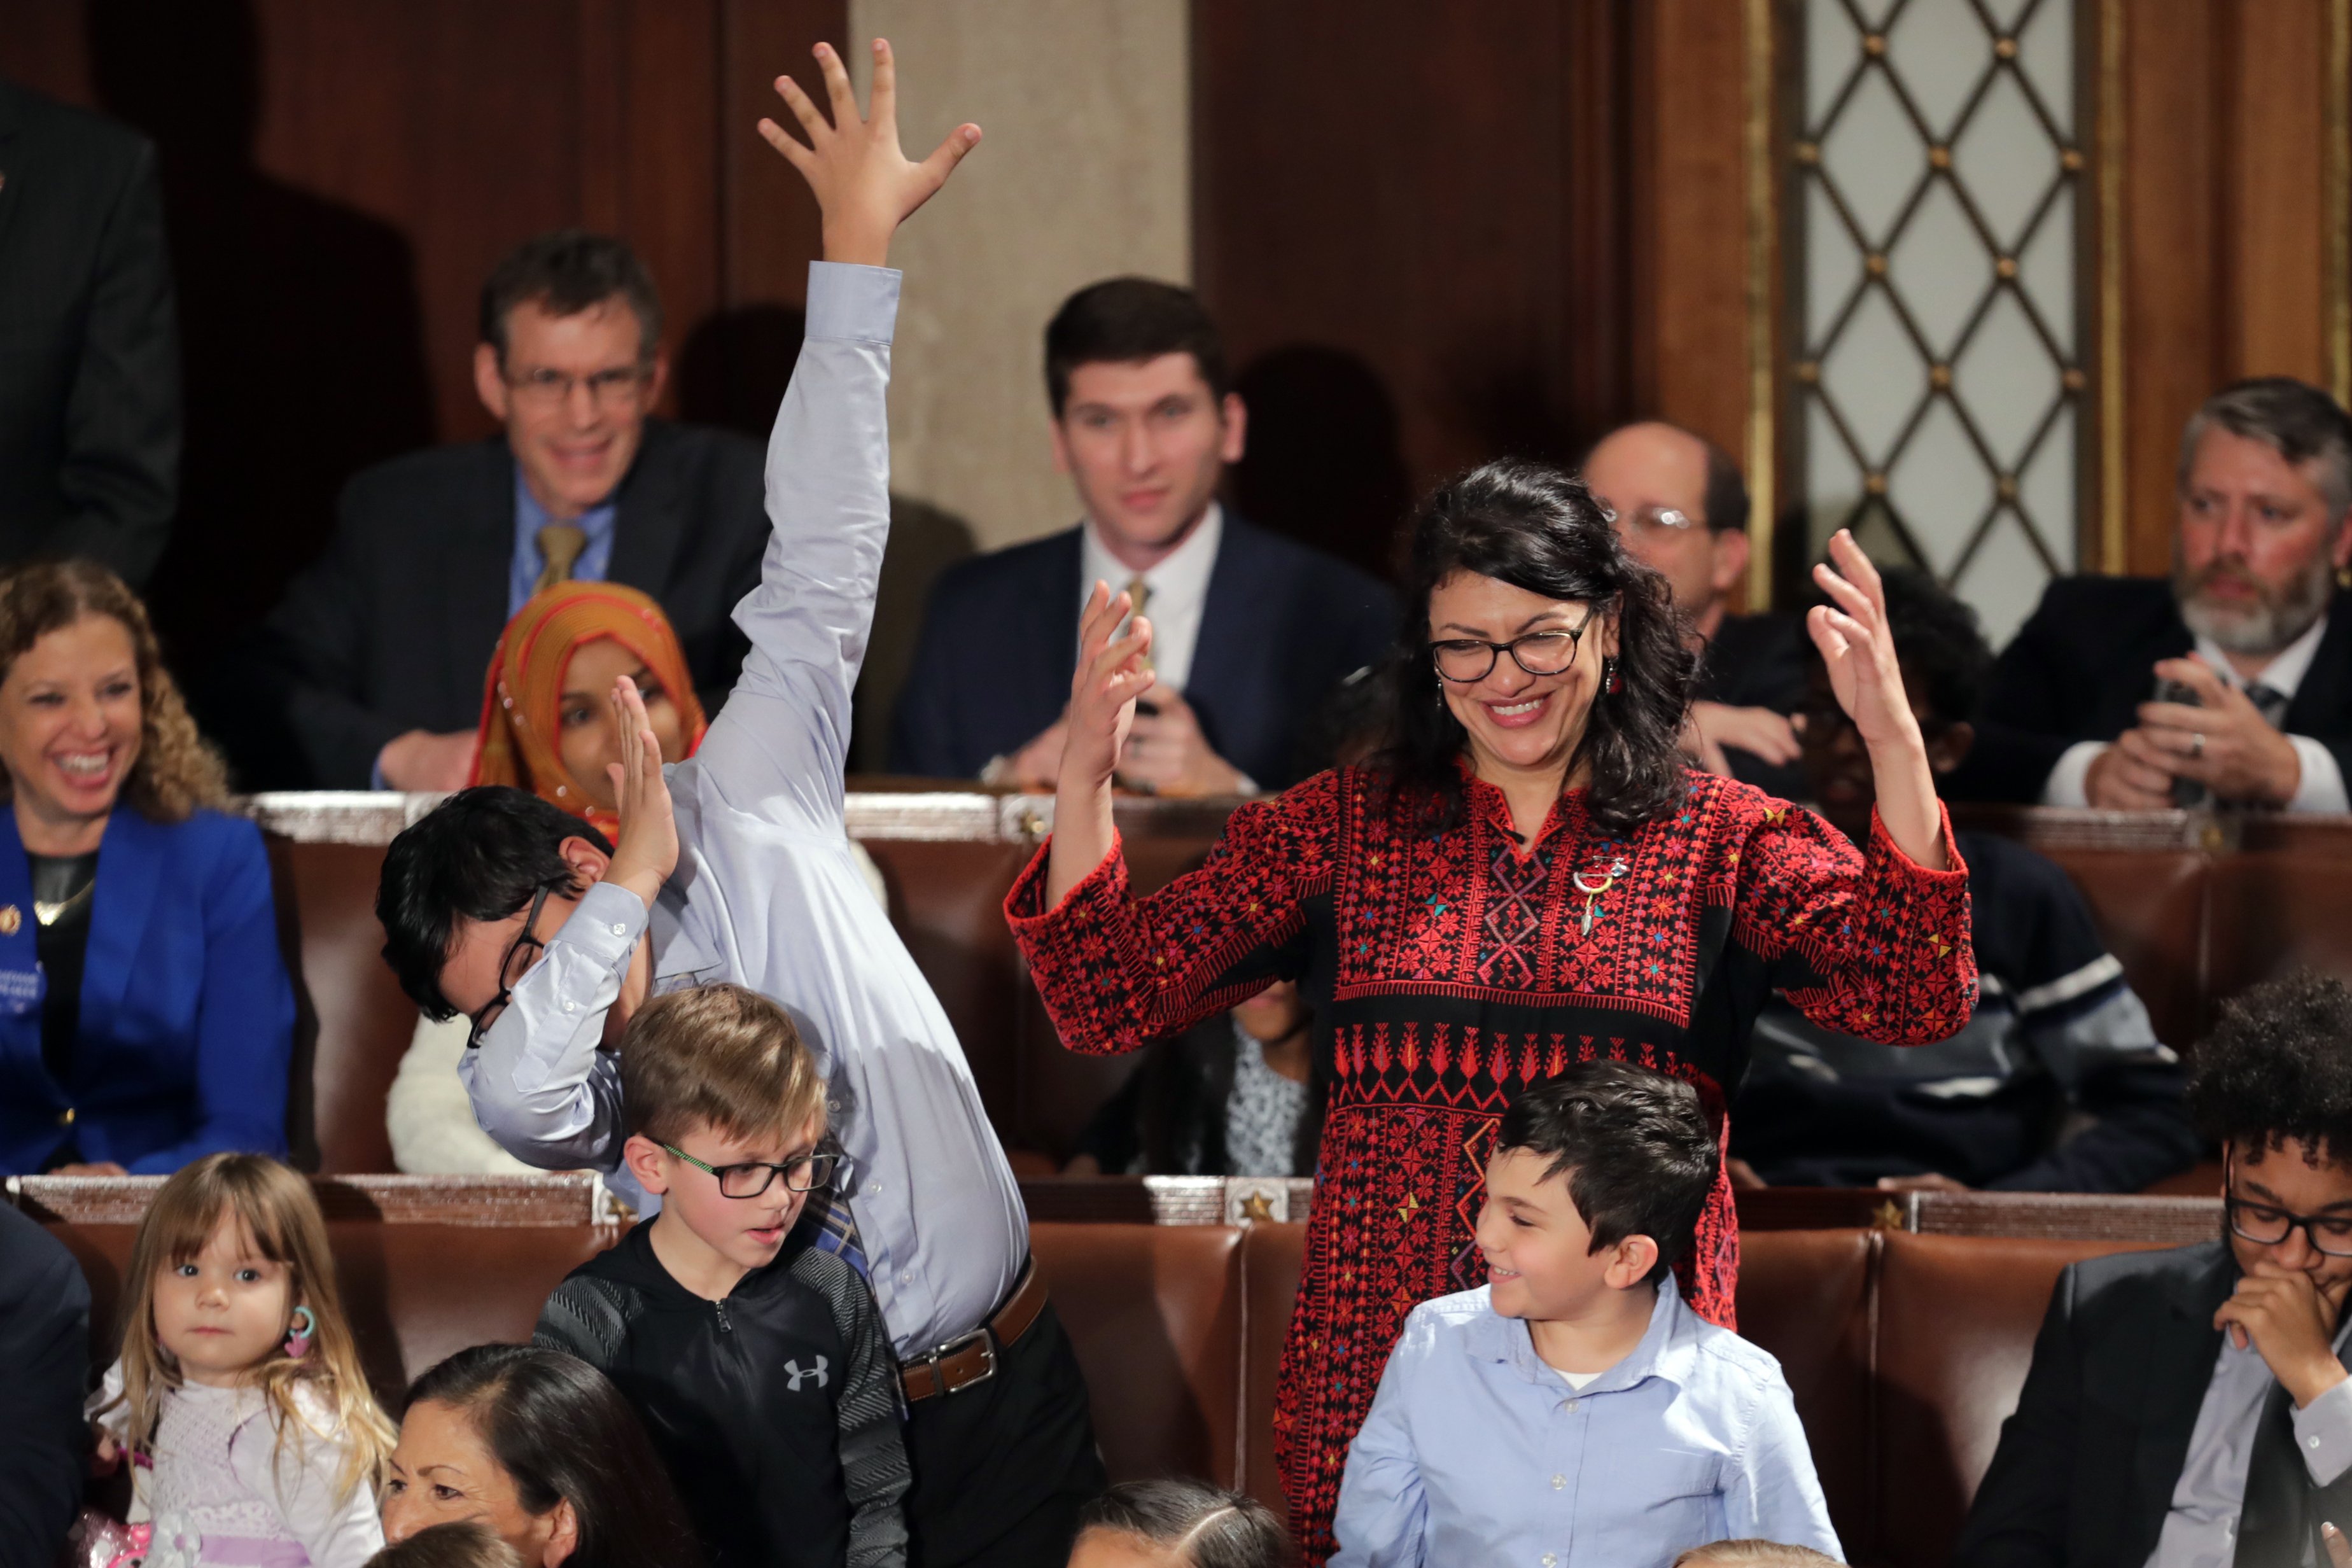 WASHINGTON, DC - JANUARY 3: Rep.-elect Rashida Tlaib (D-MI) votes for Speaker-designate Rep. Nancy Pelosi (D-CA) along with her kids during the first session of the 116th Congress at the U.S. Capitol January 03, 2019 in Washington, DC. Under the cloud of a partial federal government shutdown, Pelosi will reclaim her former title as Speaker of the House and her fellow Democrats will take control of the House of Representatives for the second time in eight years. (Photo by Chip Somodevilla/Getty Images)